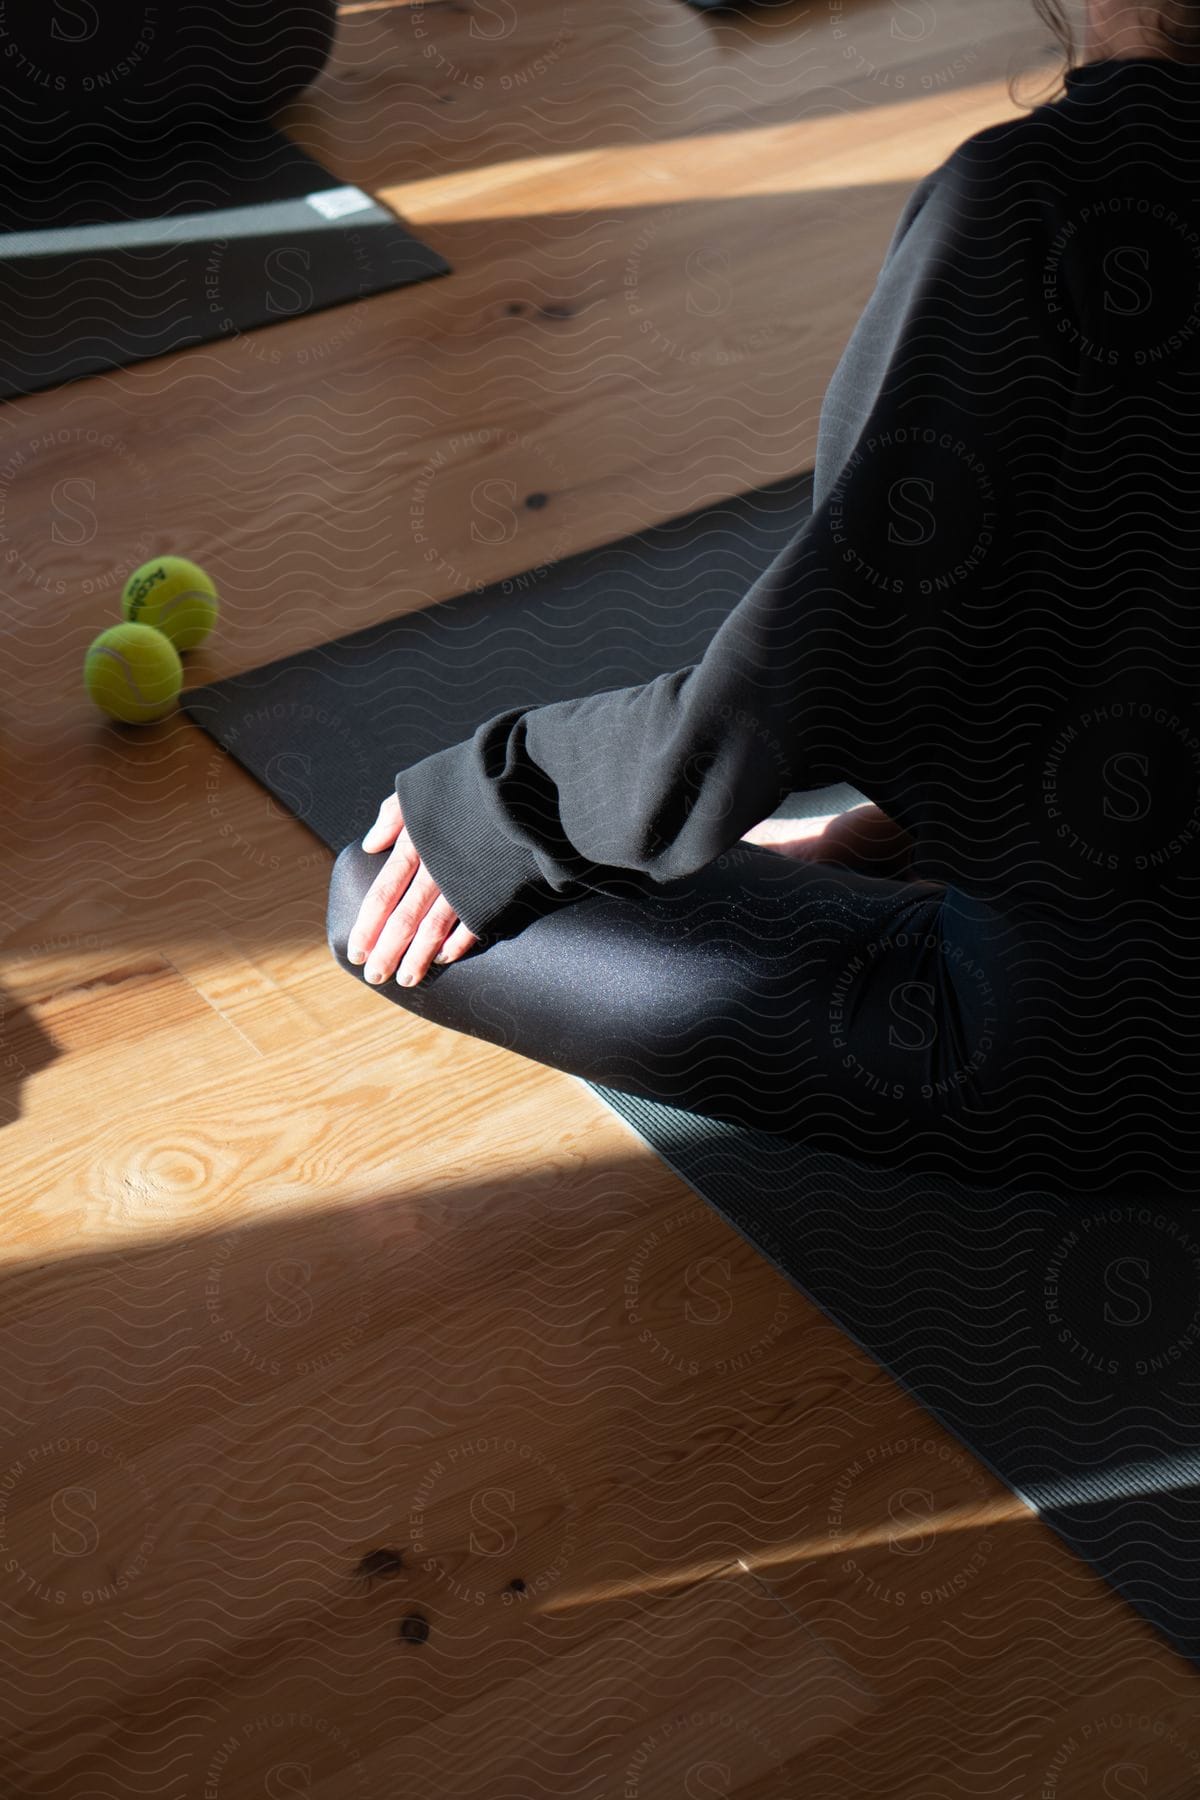 A person seated on a yoga mat on a meditative pose, hands resting on their knees, sunlight streams in, with two tennis balls lying nearby on the wooden floor.